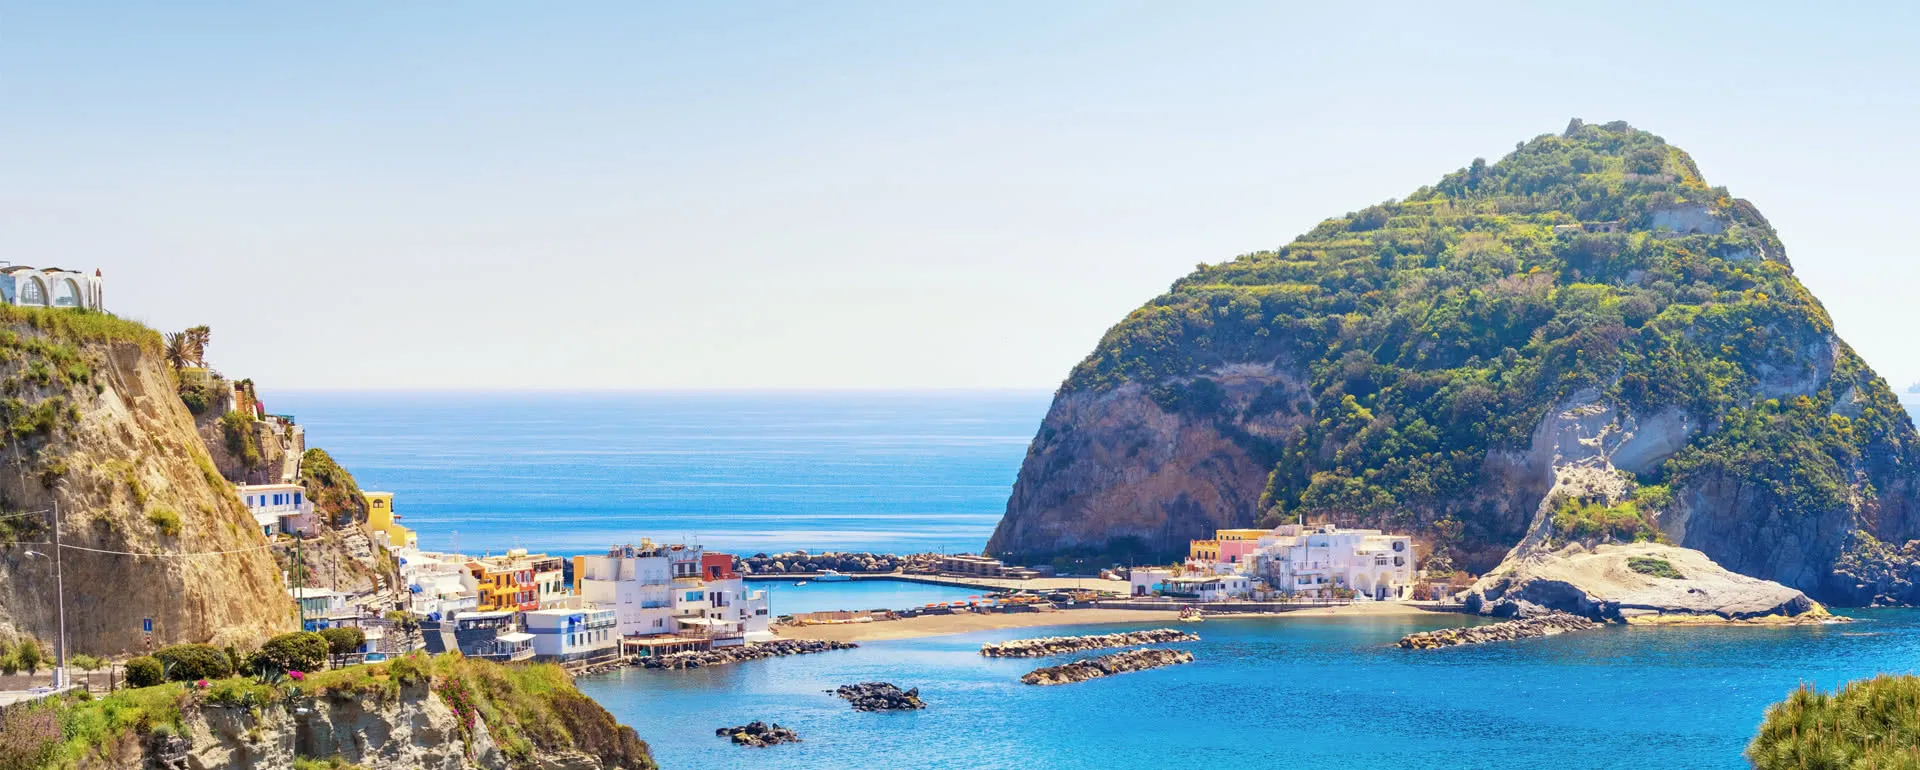 Ischia - the destination with good group discounts at hotels